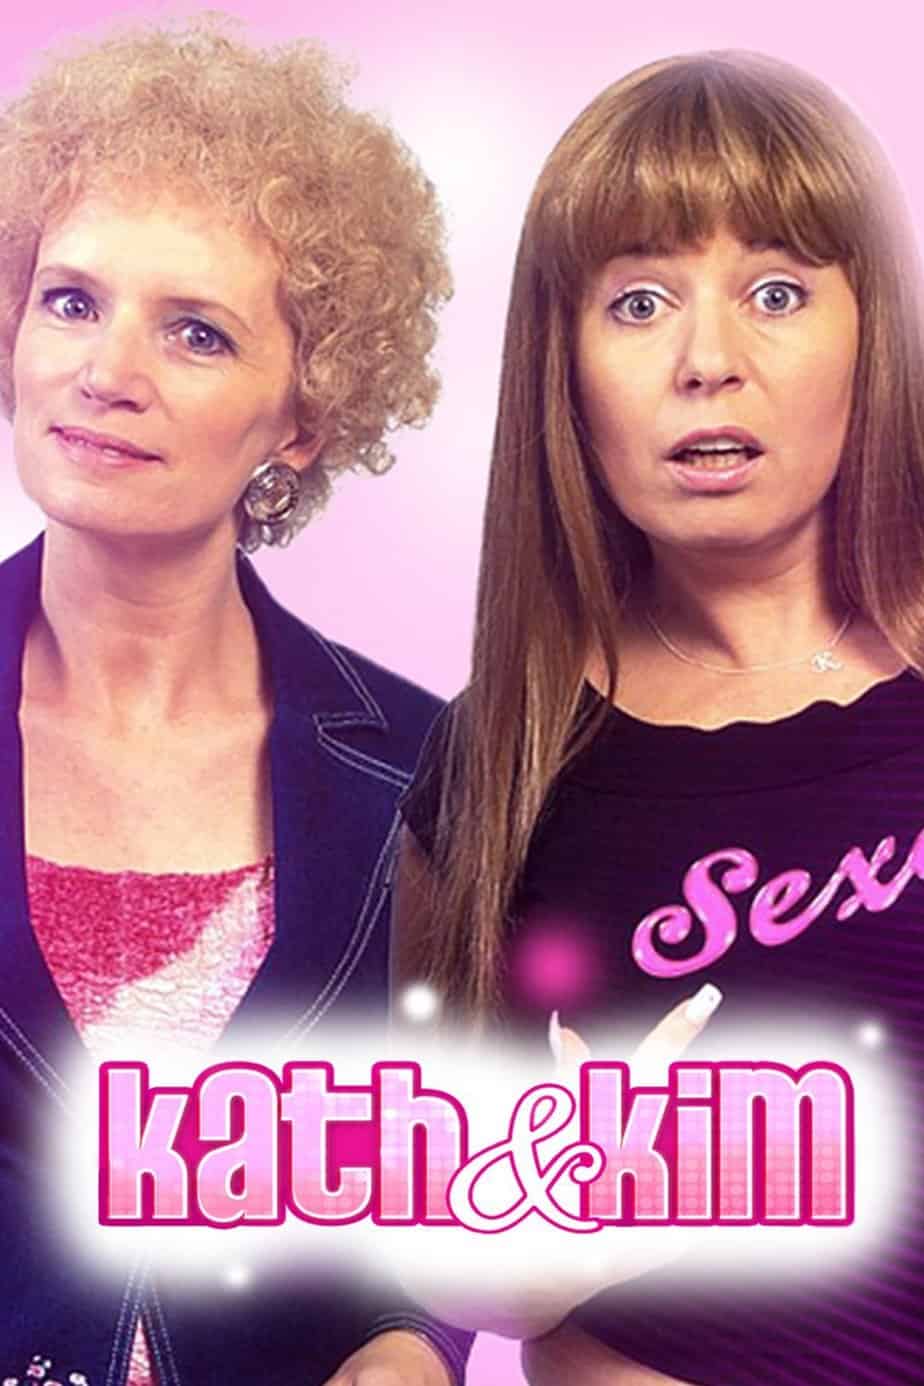 Humour and Storytelling of Kath and Kim